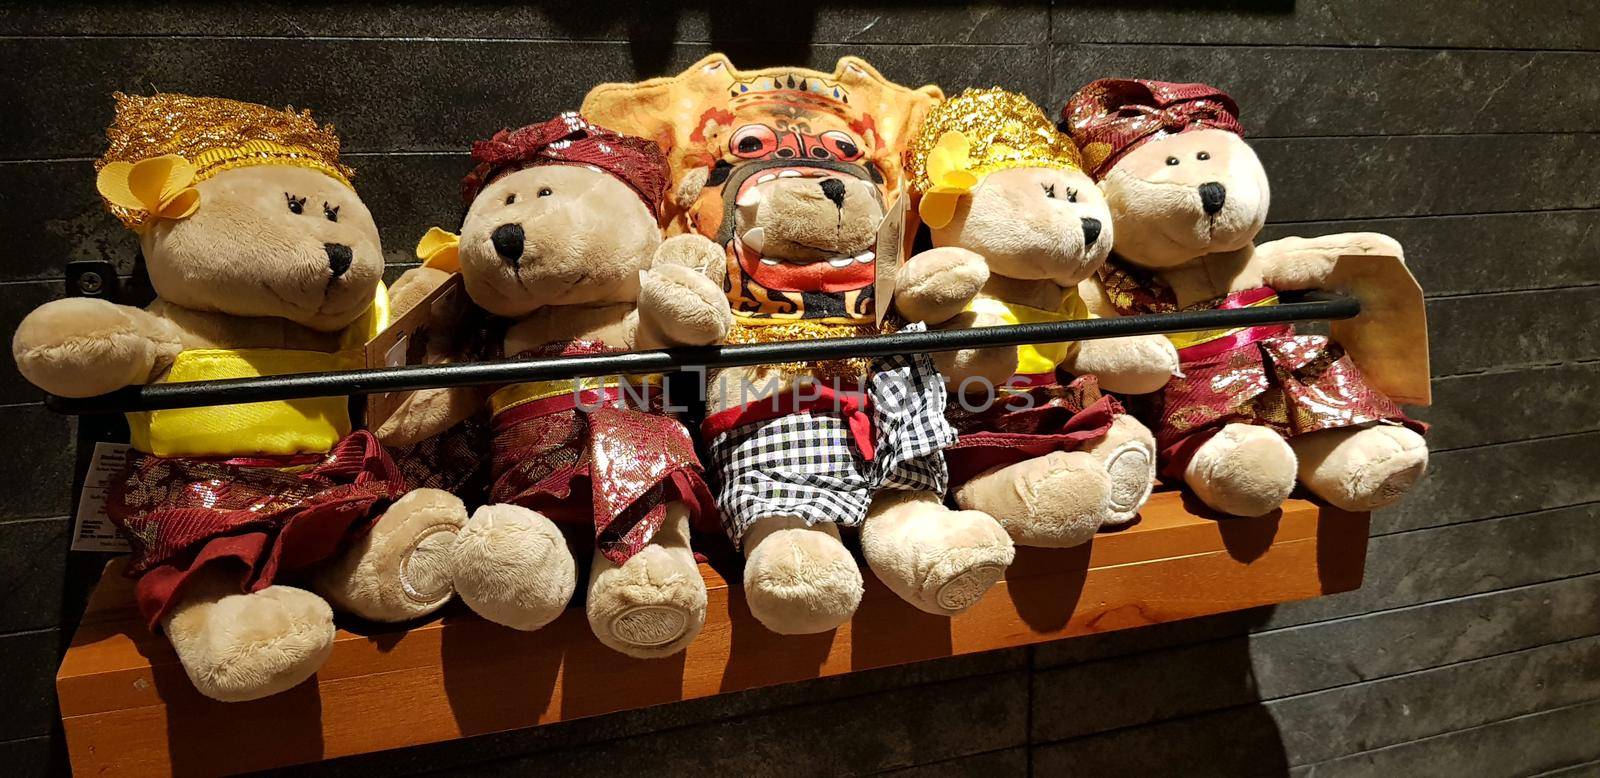 Group of Fluffy Stuffed Bear Toys Wearing various Clothes, teddy bear stuffed animal sitting in the wood bracket